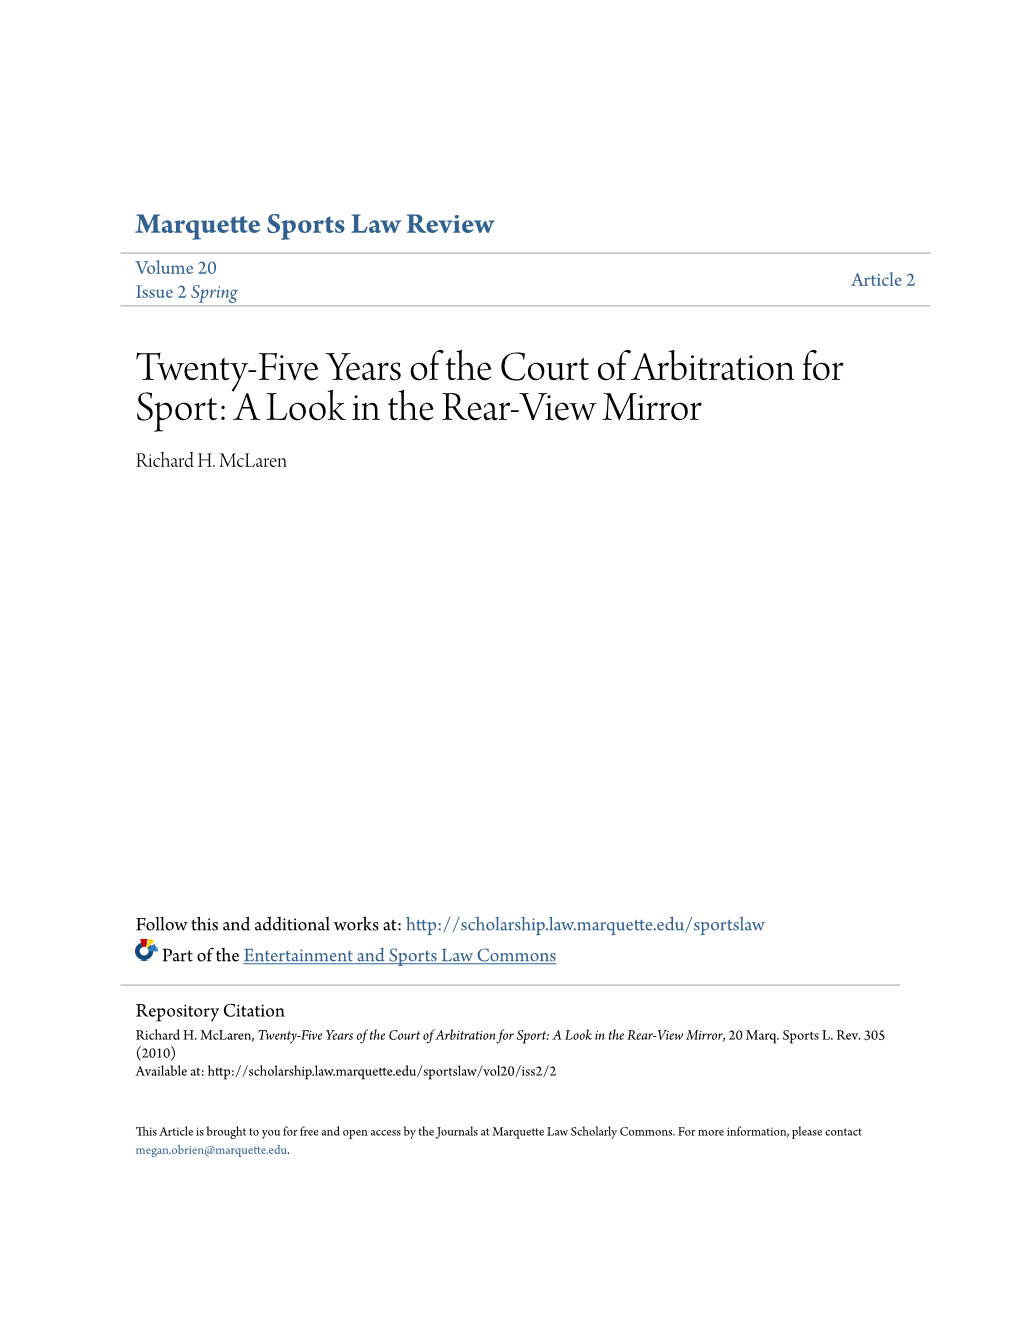 Twenty-Five Years of the Court of Arbitration for Sport: a Look in the Rear-View Mirror Richard H